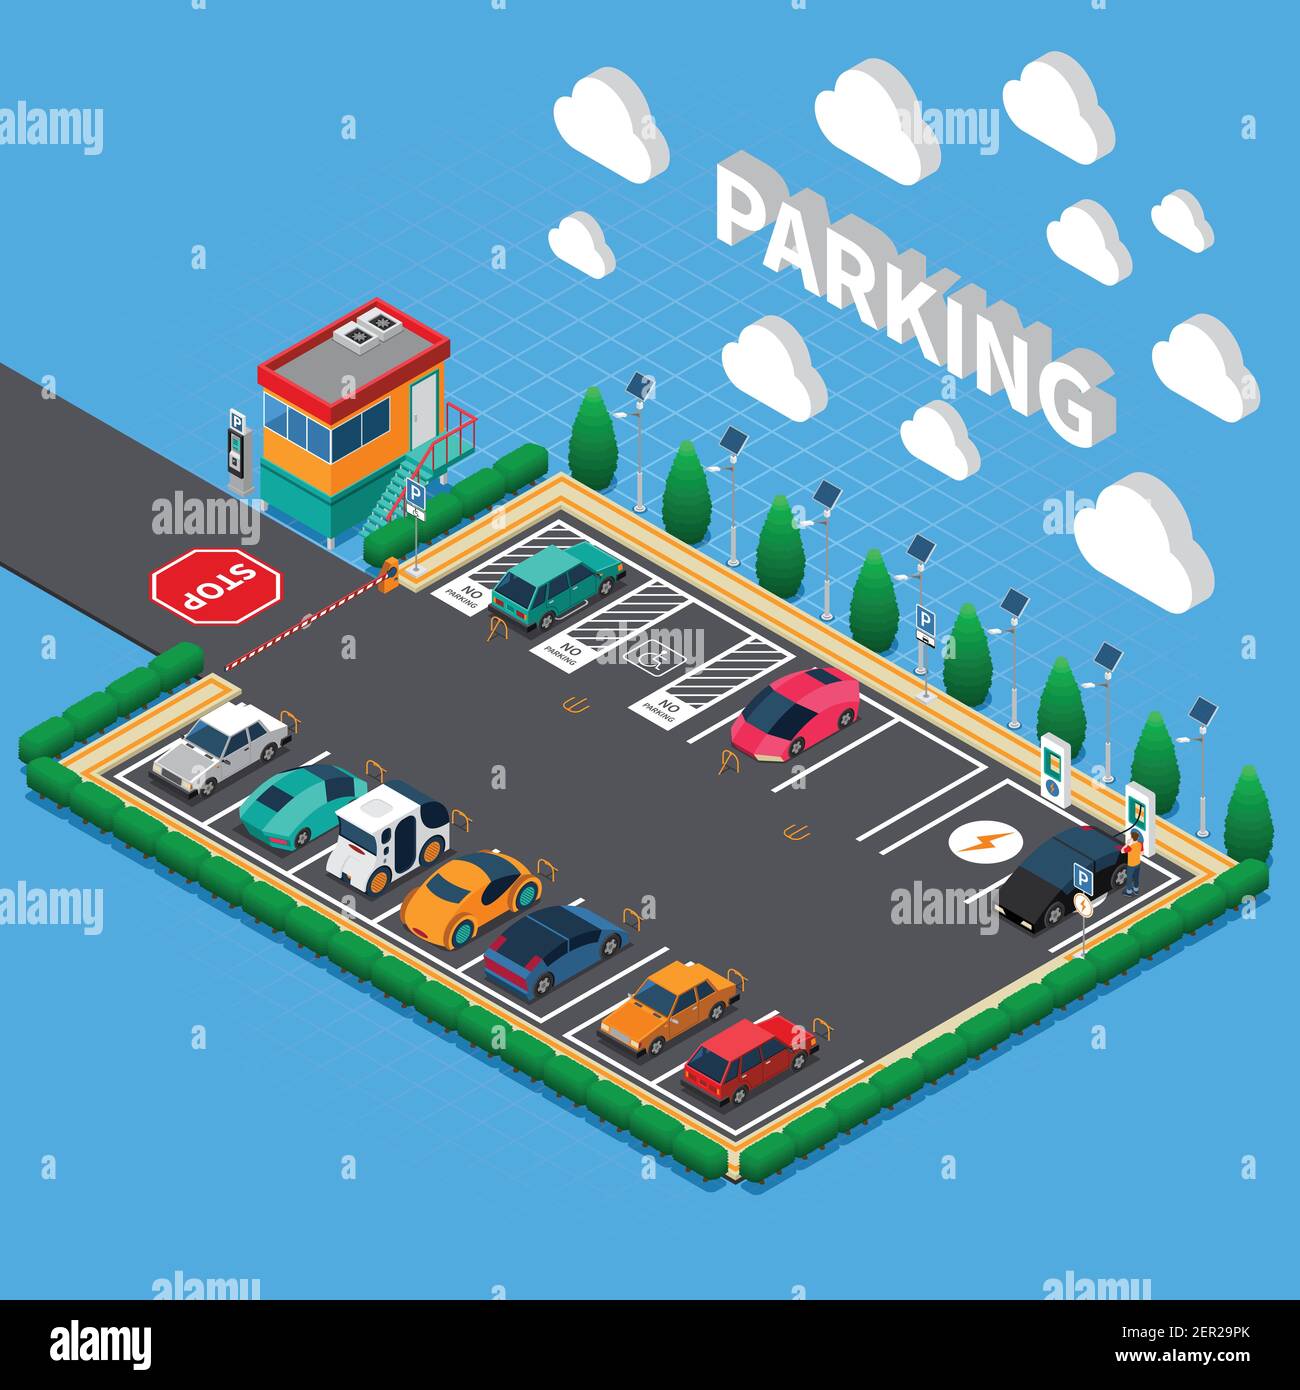 Perpendicular parking lot with plug in electric vehicles ecological charging stalls attendant booth isometric composition Stock Vector